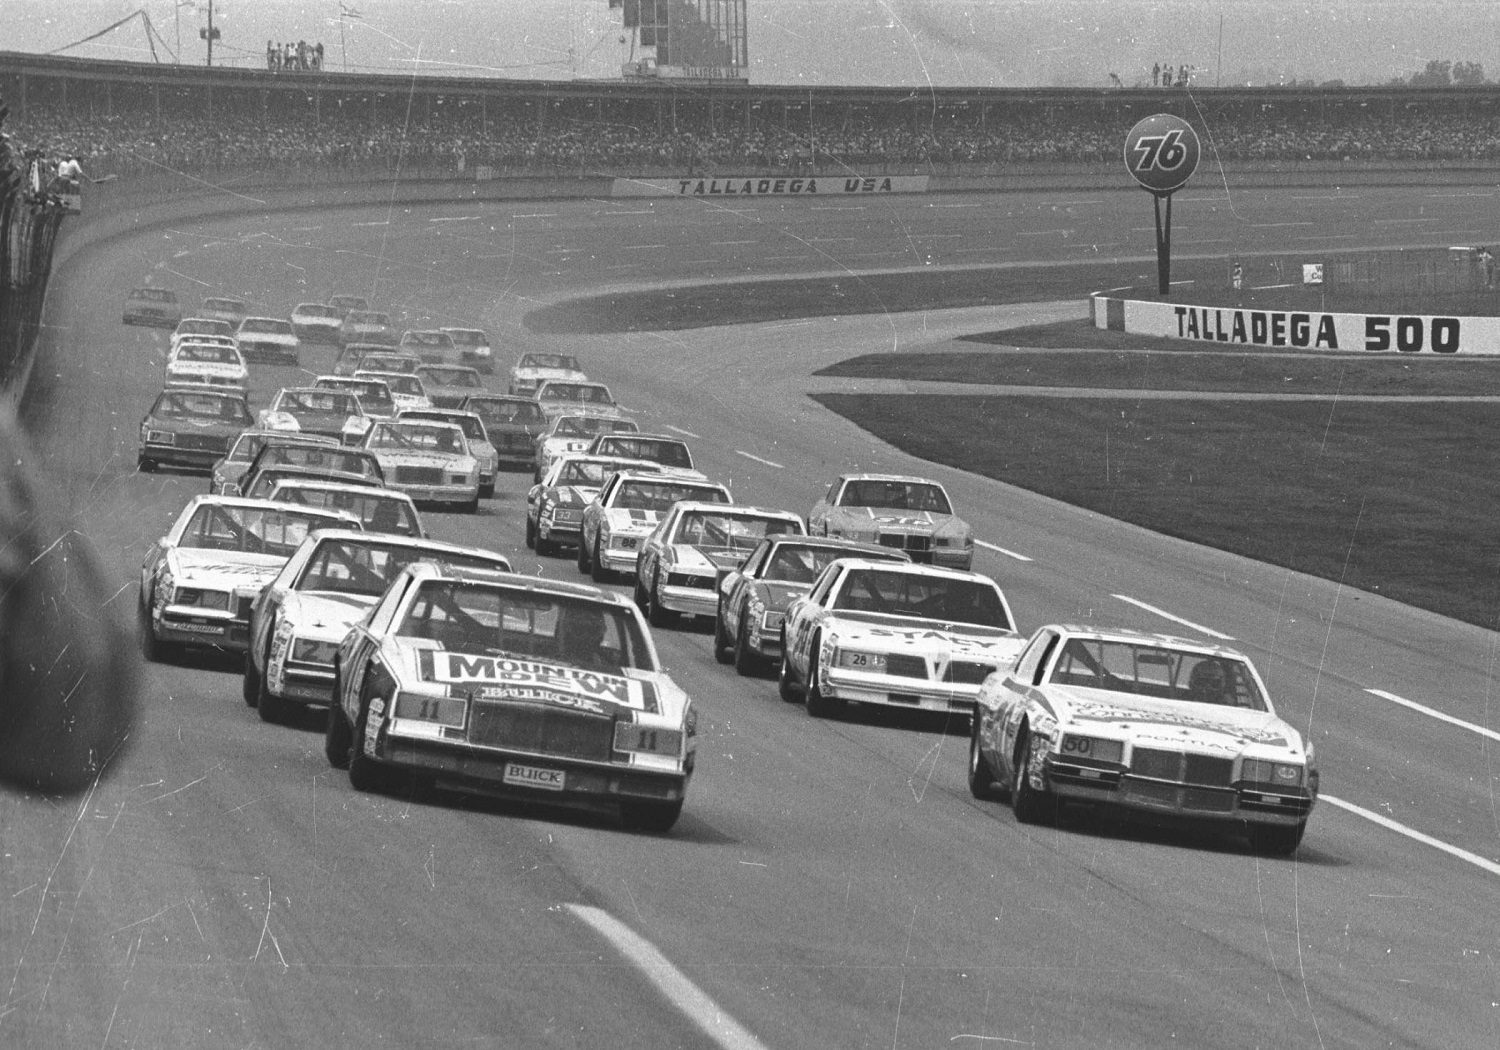 Geoff Bodine (No. 50) and Darrell Waltrip pace the field during one of the 1982 NASCAR races at the Talladega Speedway in Talladega, Alabama.